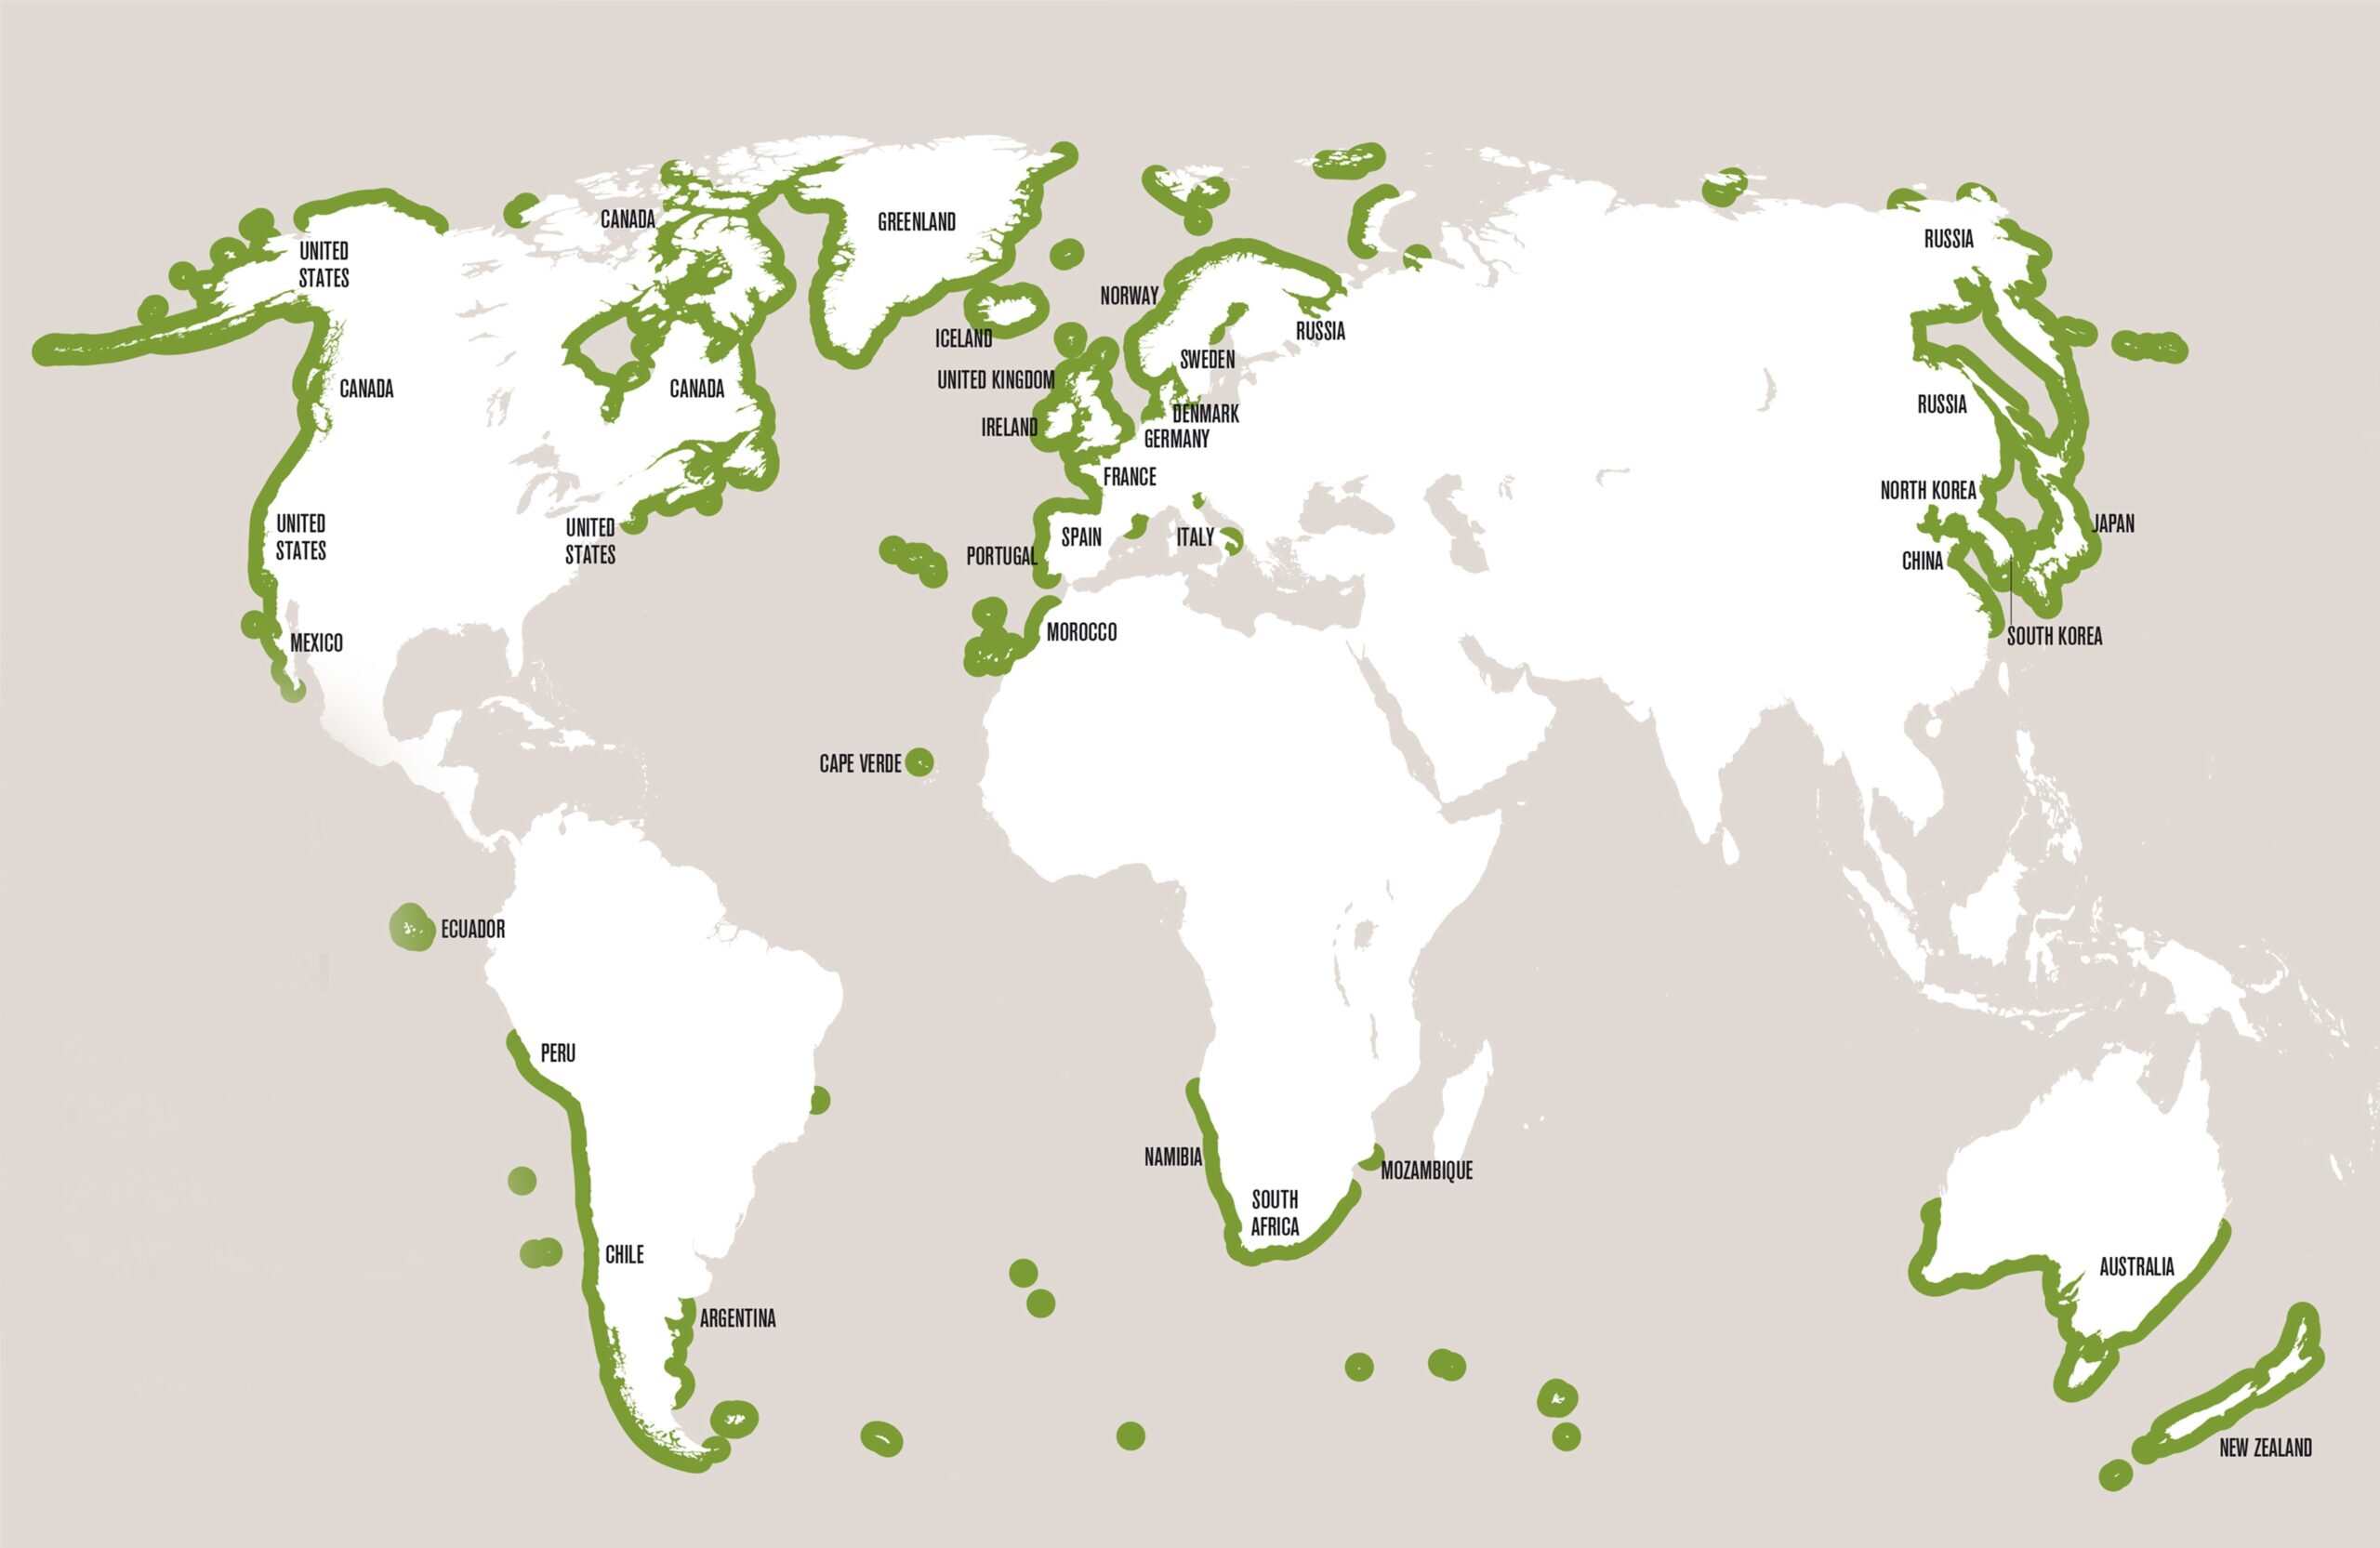 Kelp Forests around the world. Image credit Kelp Forest Alliance collection and GRID Arendal scaled